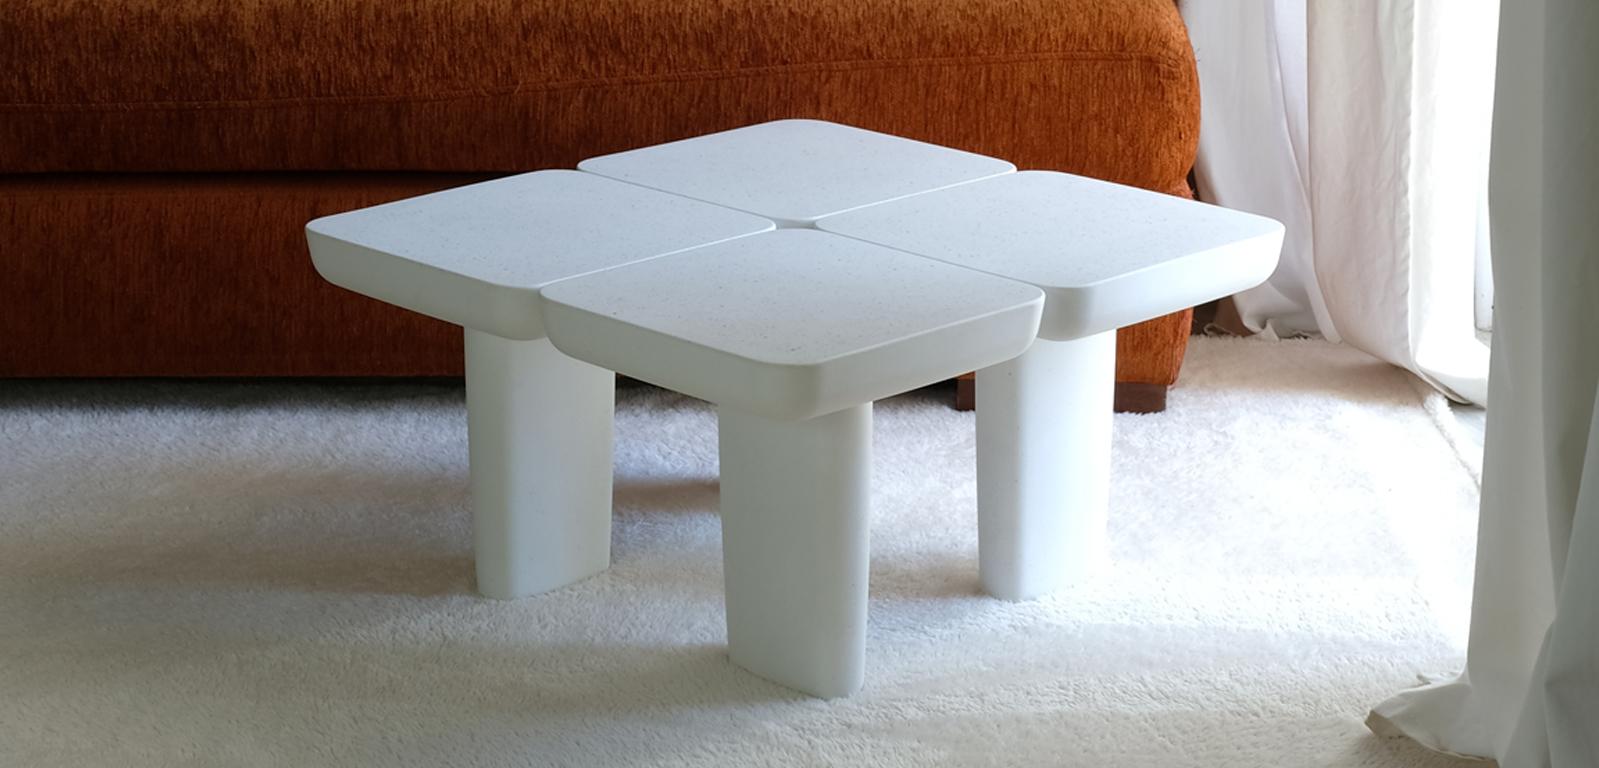 The LEAF TABLE is part of our mono-material object collection. This simple and minimalistic low table is both humble and bold with an elegant sense of proportion and balance.

Design: Alentes Atelier 
Material: Cast Stone
Made by hand in Greece,